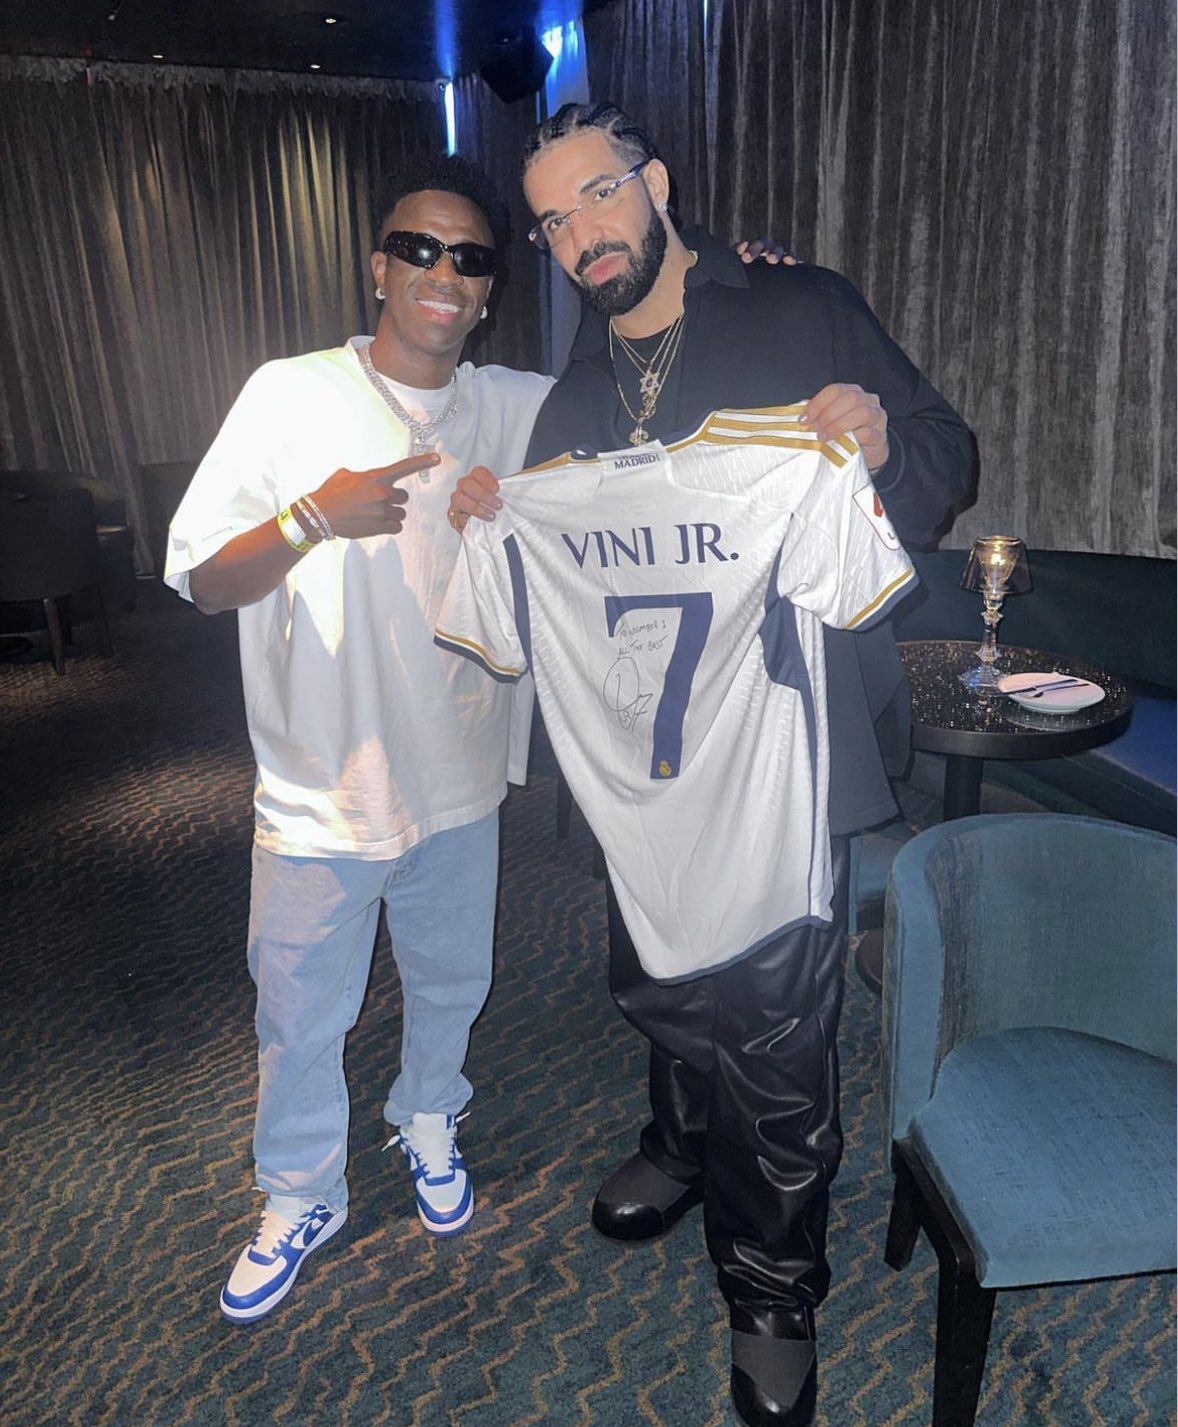 Real Madrid fans afraid as Vinicius Junior gifts Drake jersey